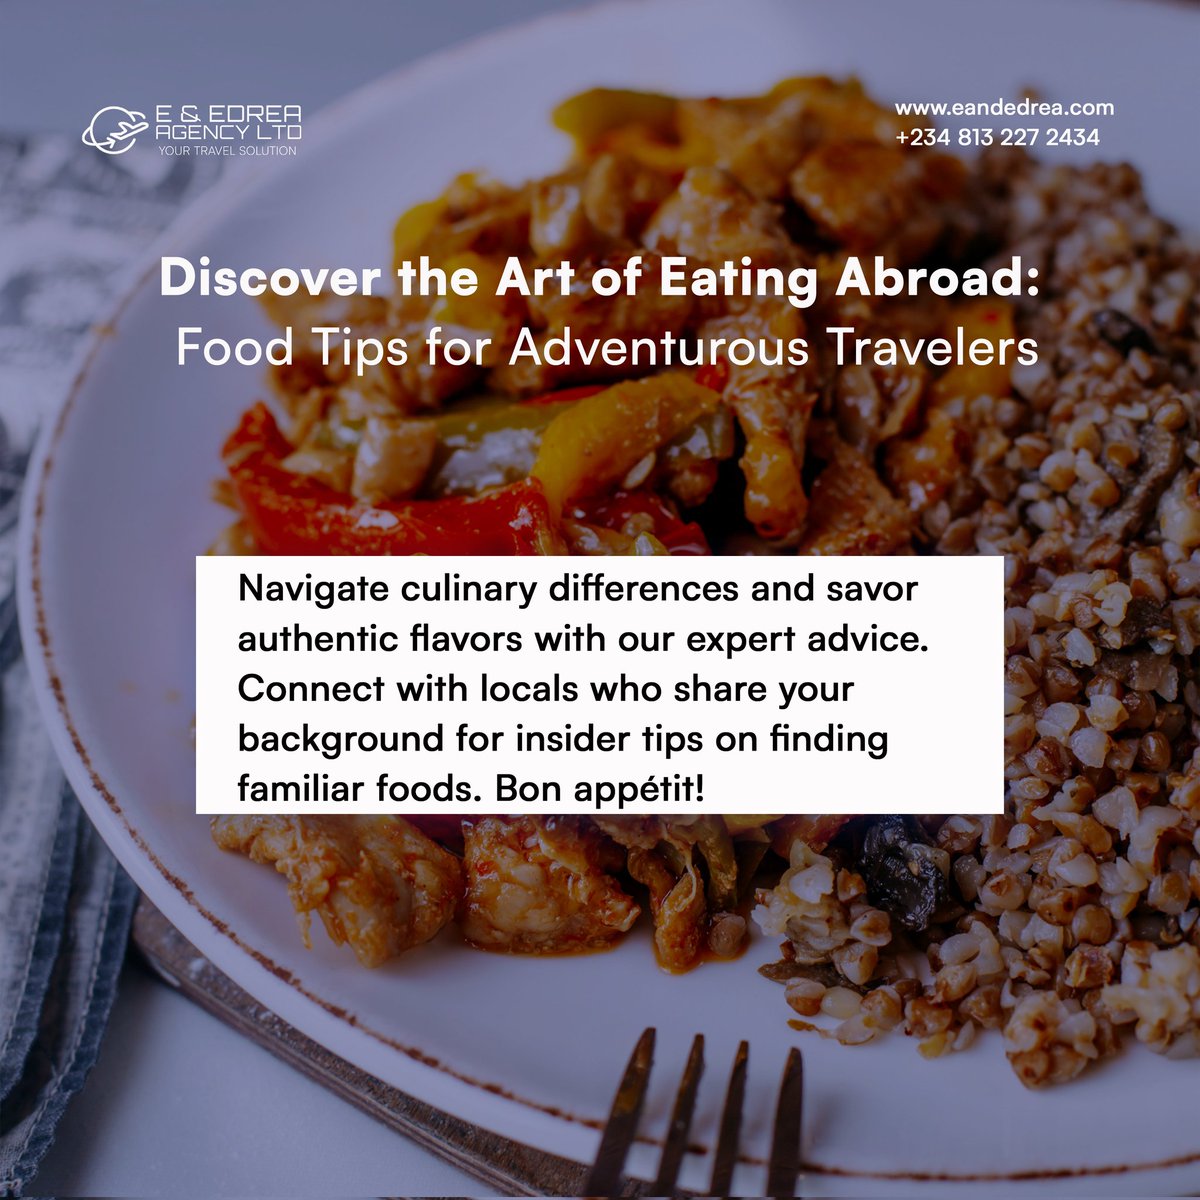 Discover the secrets to eating well while abroad. Our food tips will guide you to local flavors and help you find familiar dishes. Connect with your community and embrace culinary adventures together! #FoodTips #CulinaryExploration #TravelAgency #FoodExploration